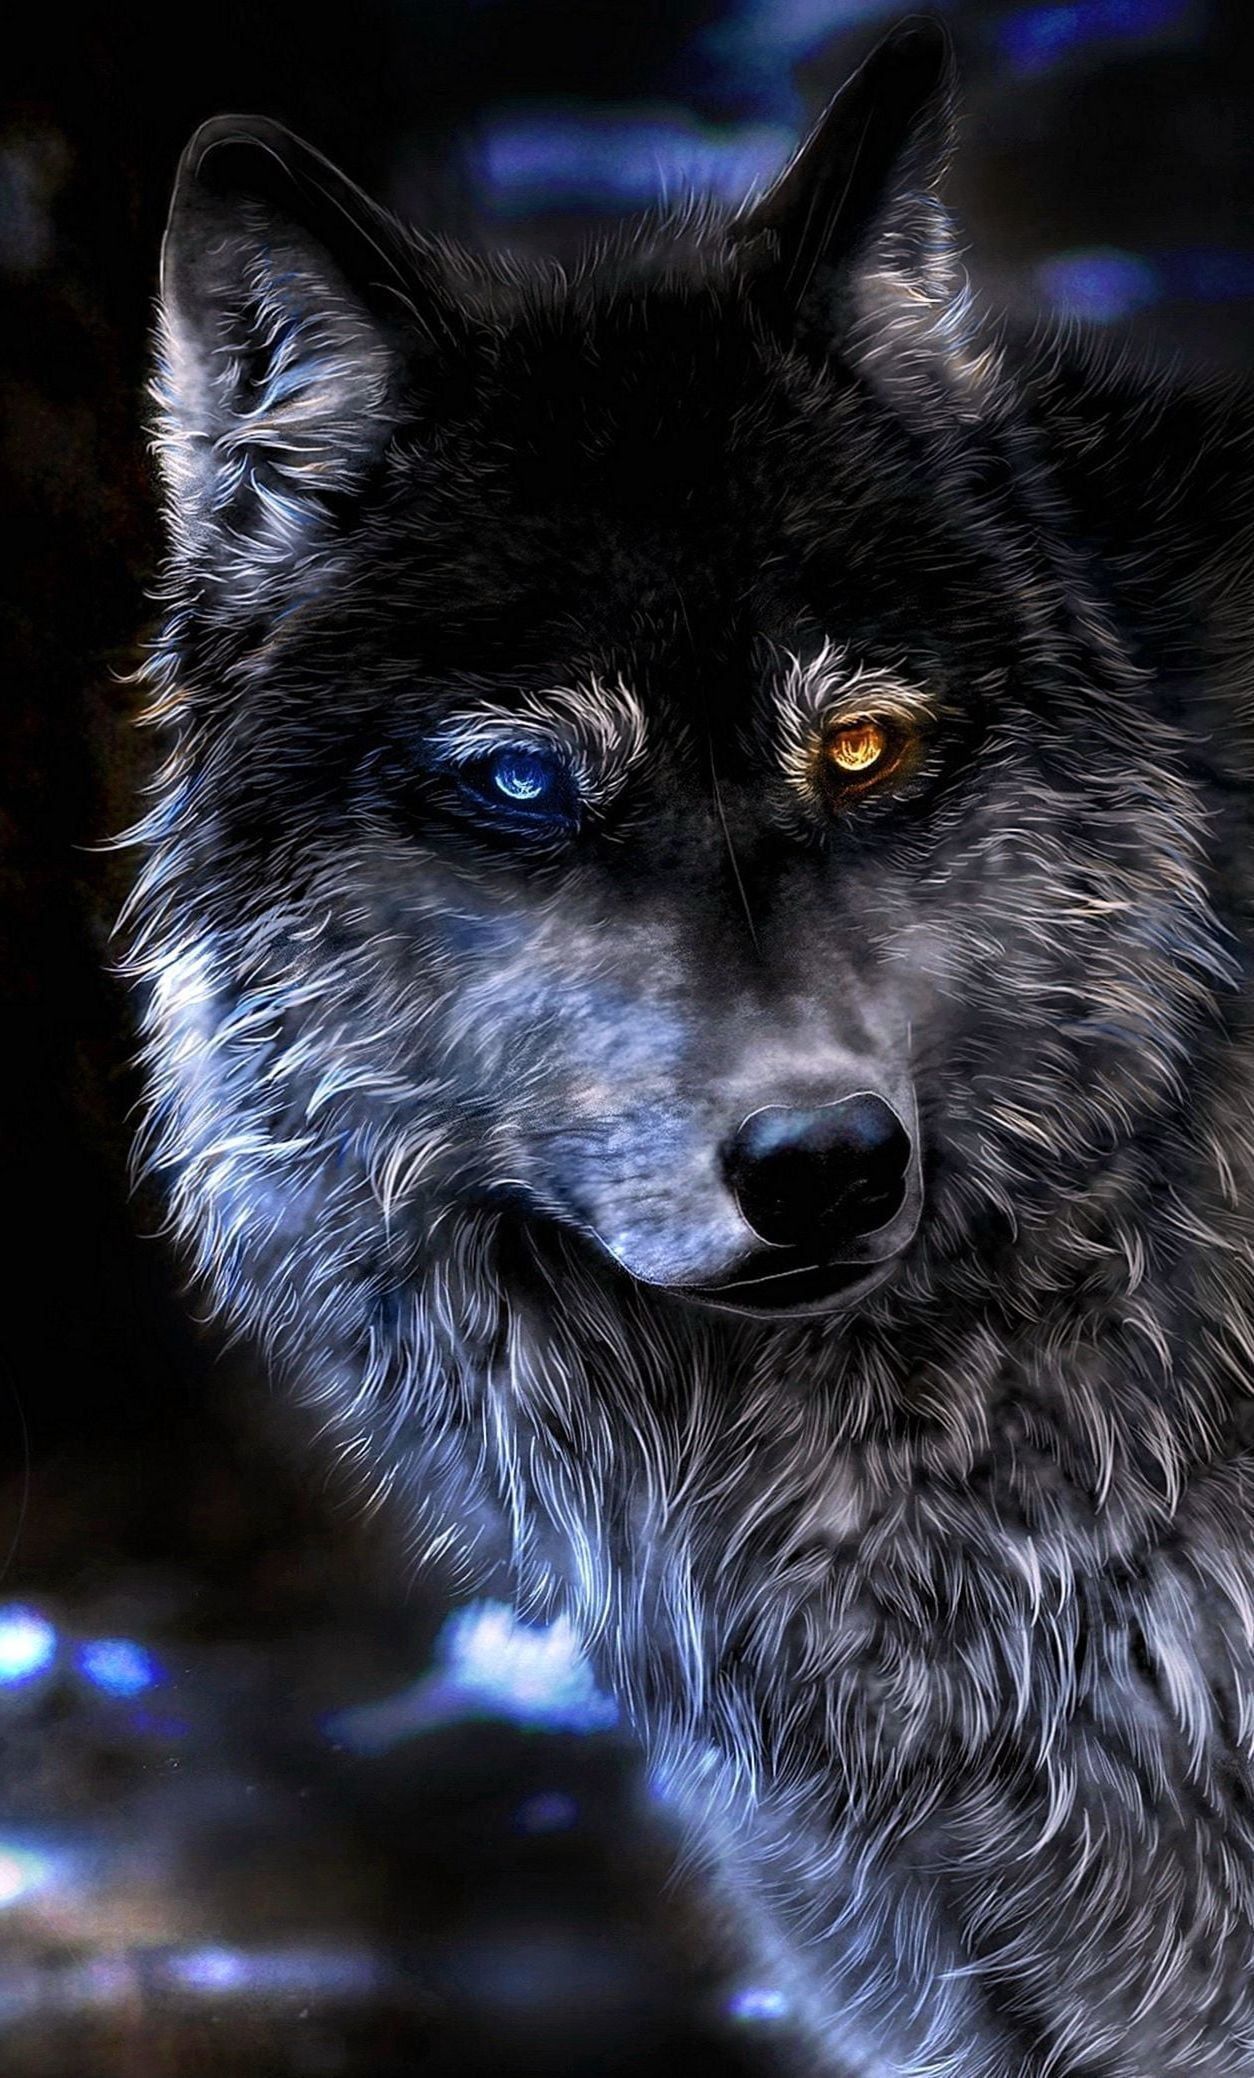 Angry Wolf Wallpaper 4K iPhone #Angry #Wolf #Wallpaper K #iPhone. Angry wolf, iPhone wallpaper wolf, Wolf wallpaper